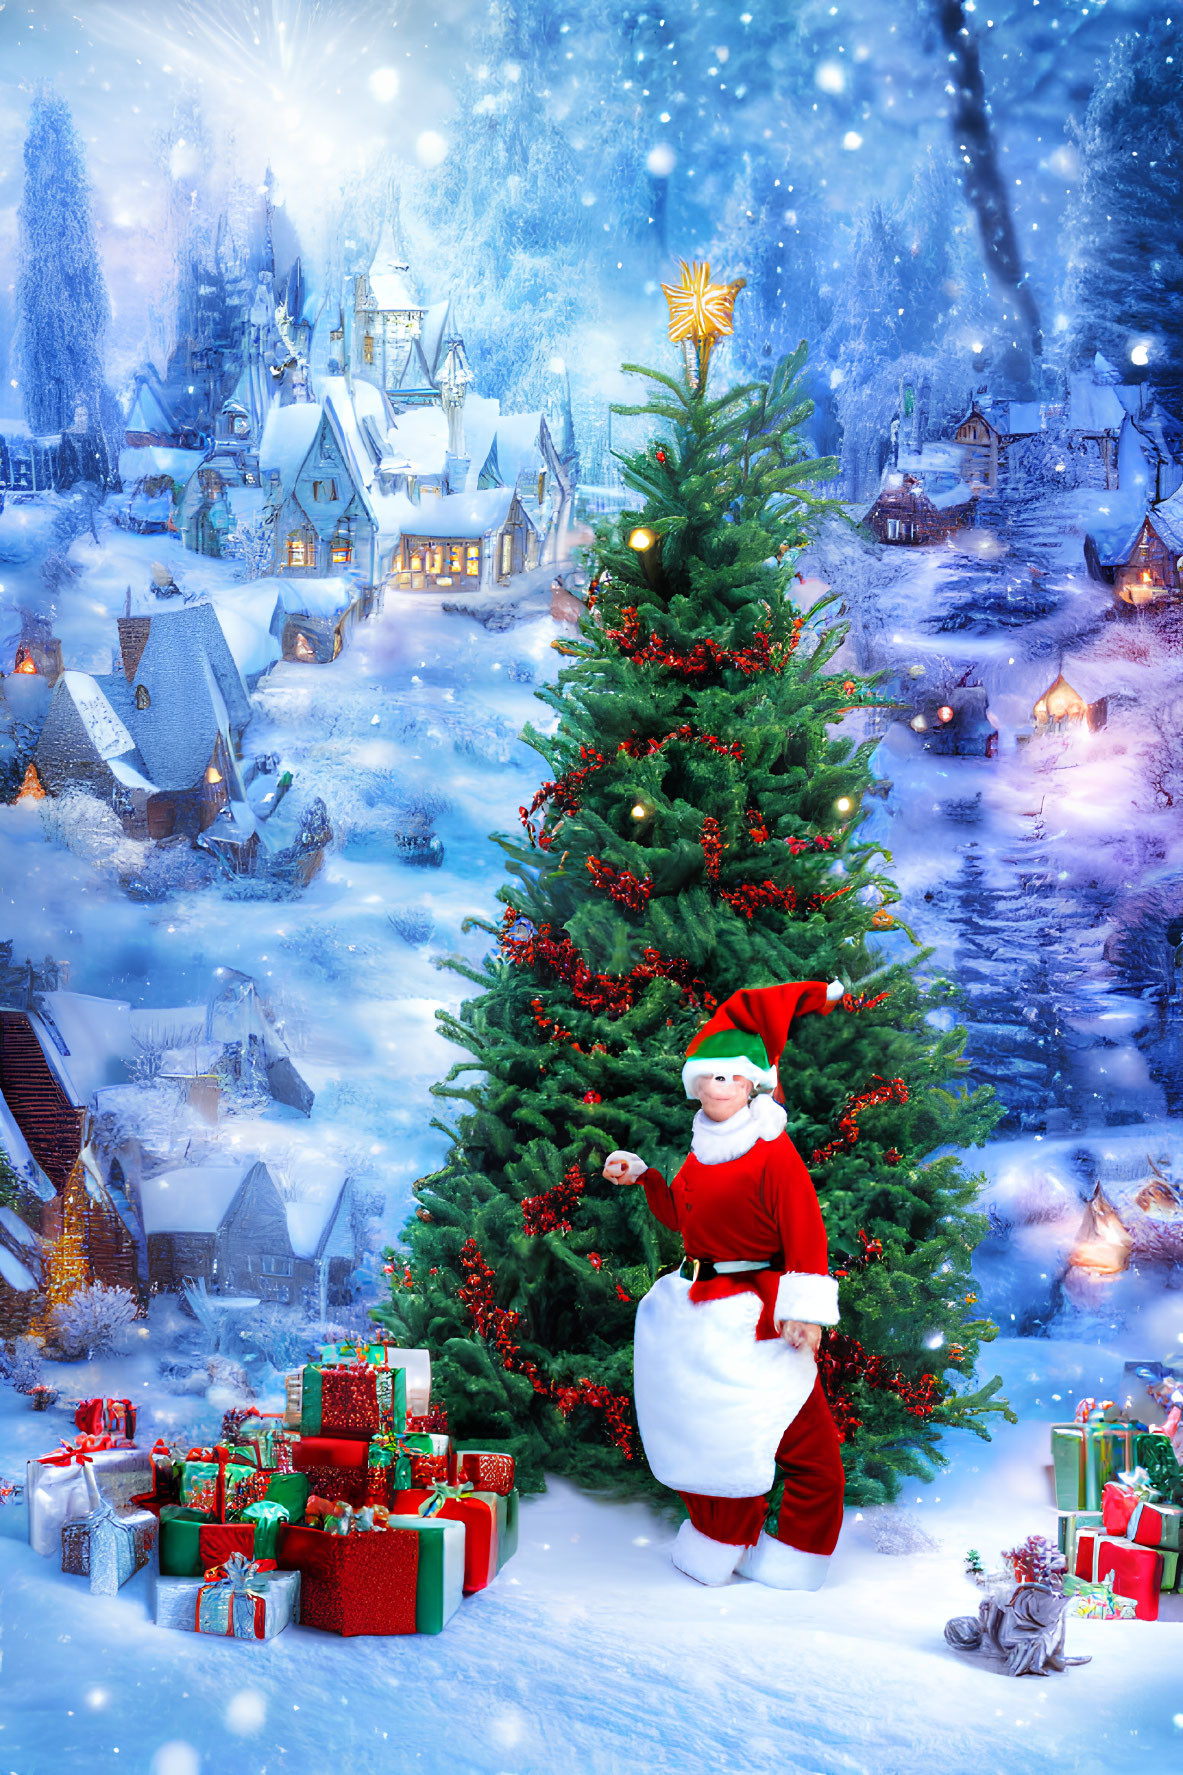 Santa Claus with Christmas tree and gifts in snowy village scene